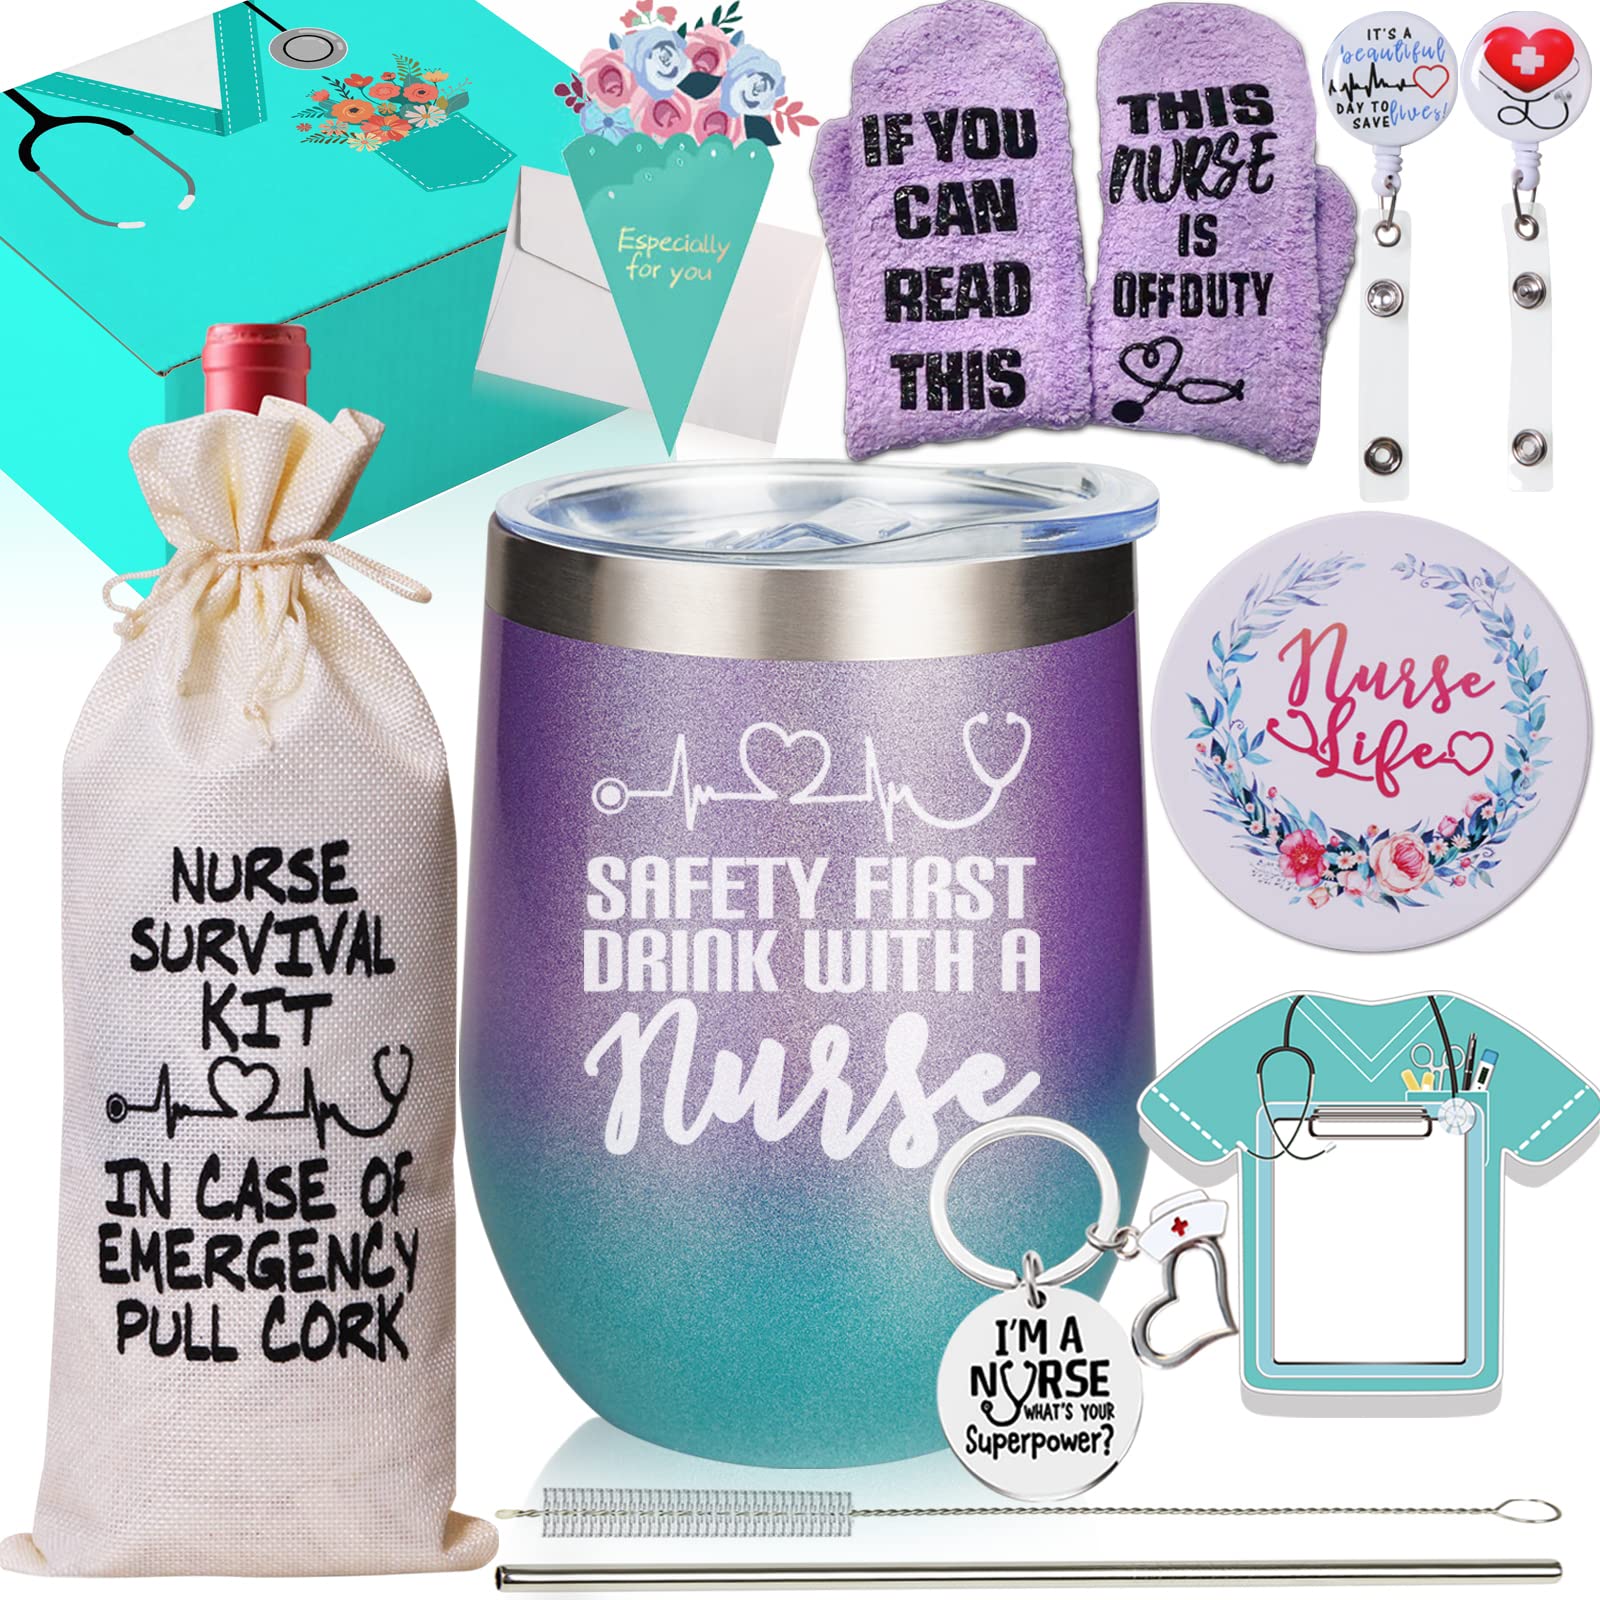 Birthday Gifts for Sister Mom Wife - Spa Box Basket Unique Gifts Ideas for  Her, Girl Female Presents for Best Friend Girlfriend Teacher Nurse, Tumbler  Fabulous Relaxation Gift Set for Women 